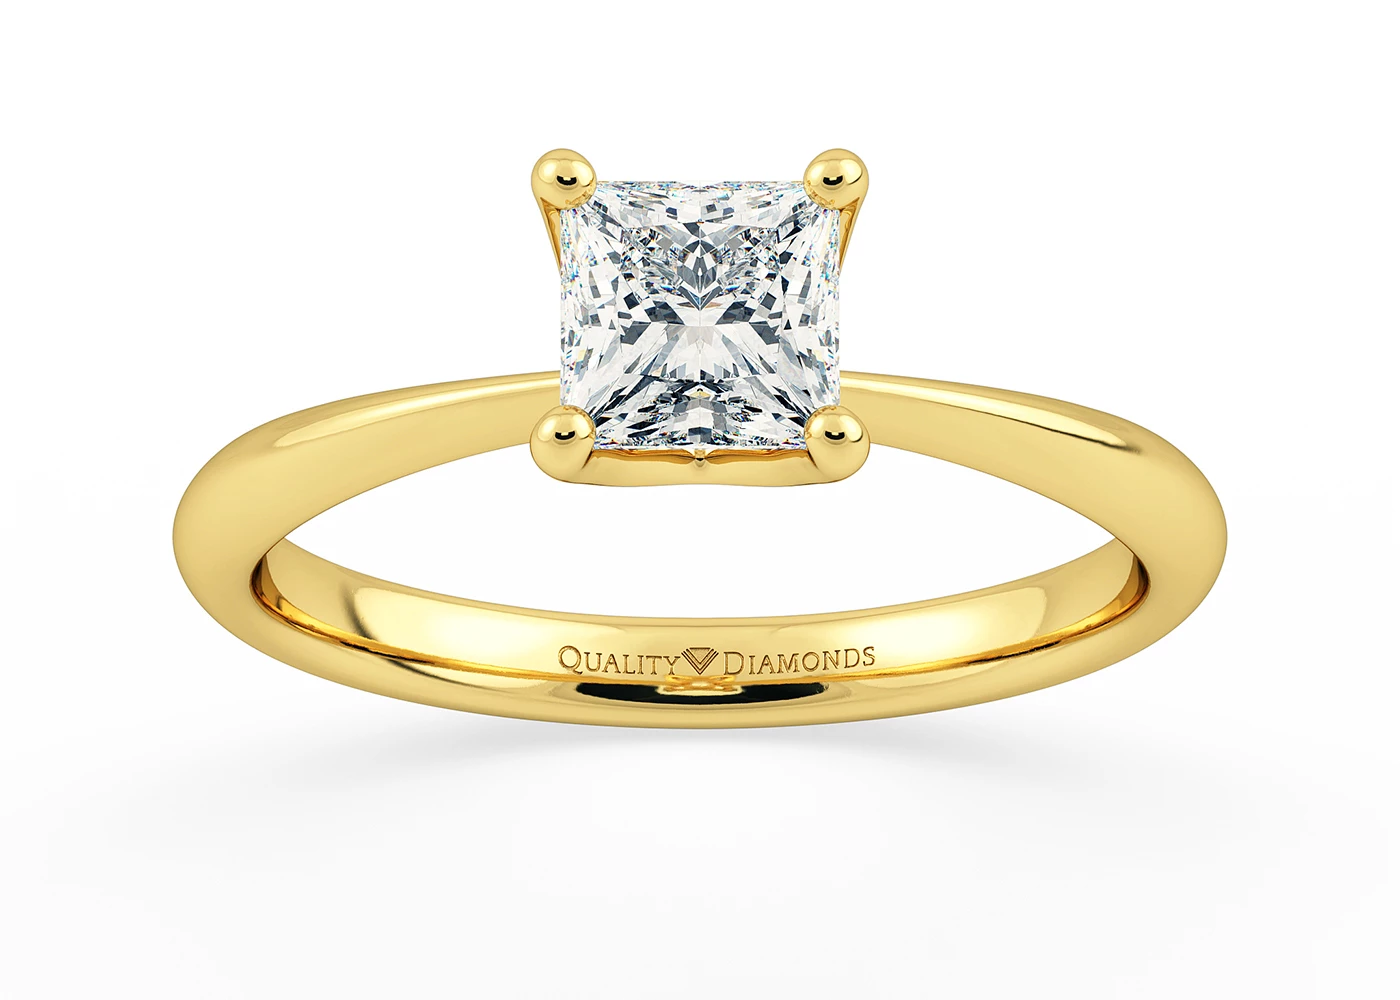 Two Carat Princess Solitaire Diamond Engagement Ring in 18K Yellow Gold